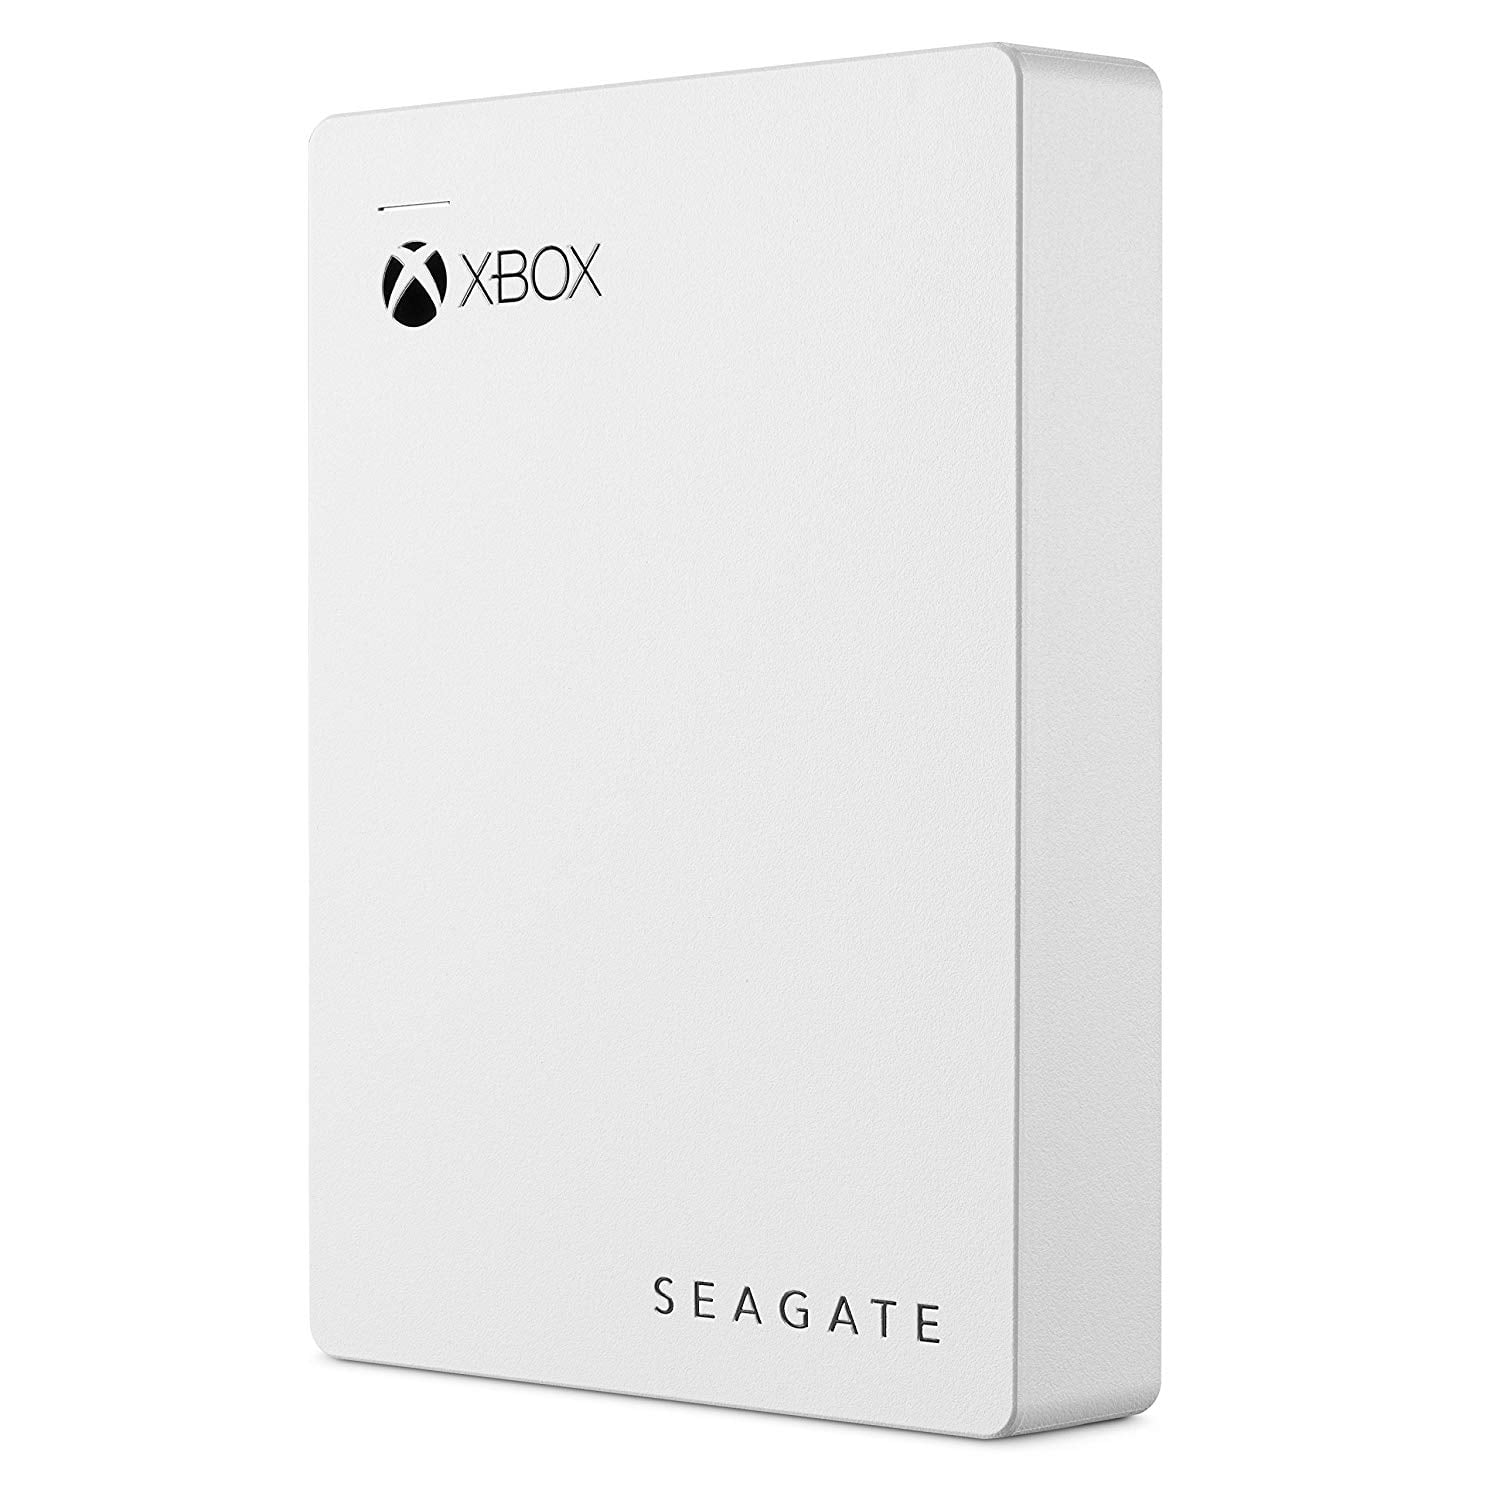 Green Blue & Game Drive 4TB External Hard Drive Portable HDD STEA4000402 Designed for Xbox One Seagate Game Drive 4TB External Hard Drive Portable HDD 1 Year Rescue Service 